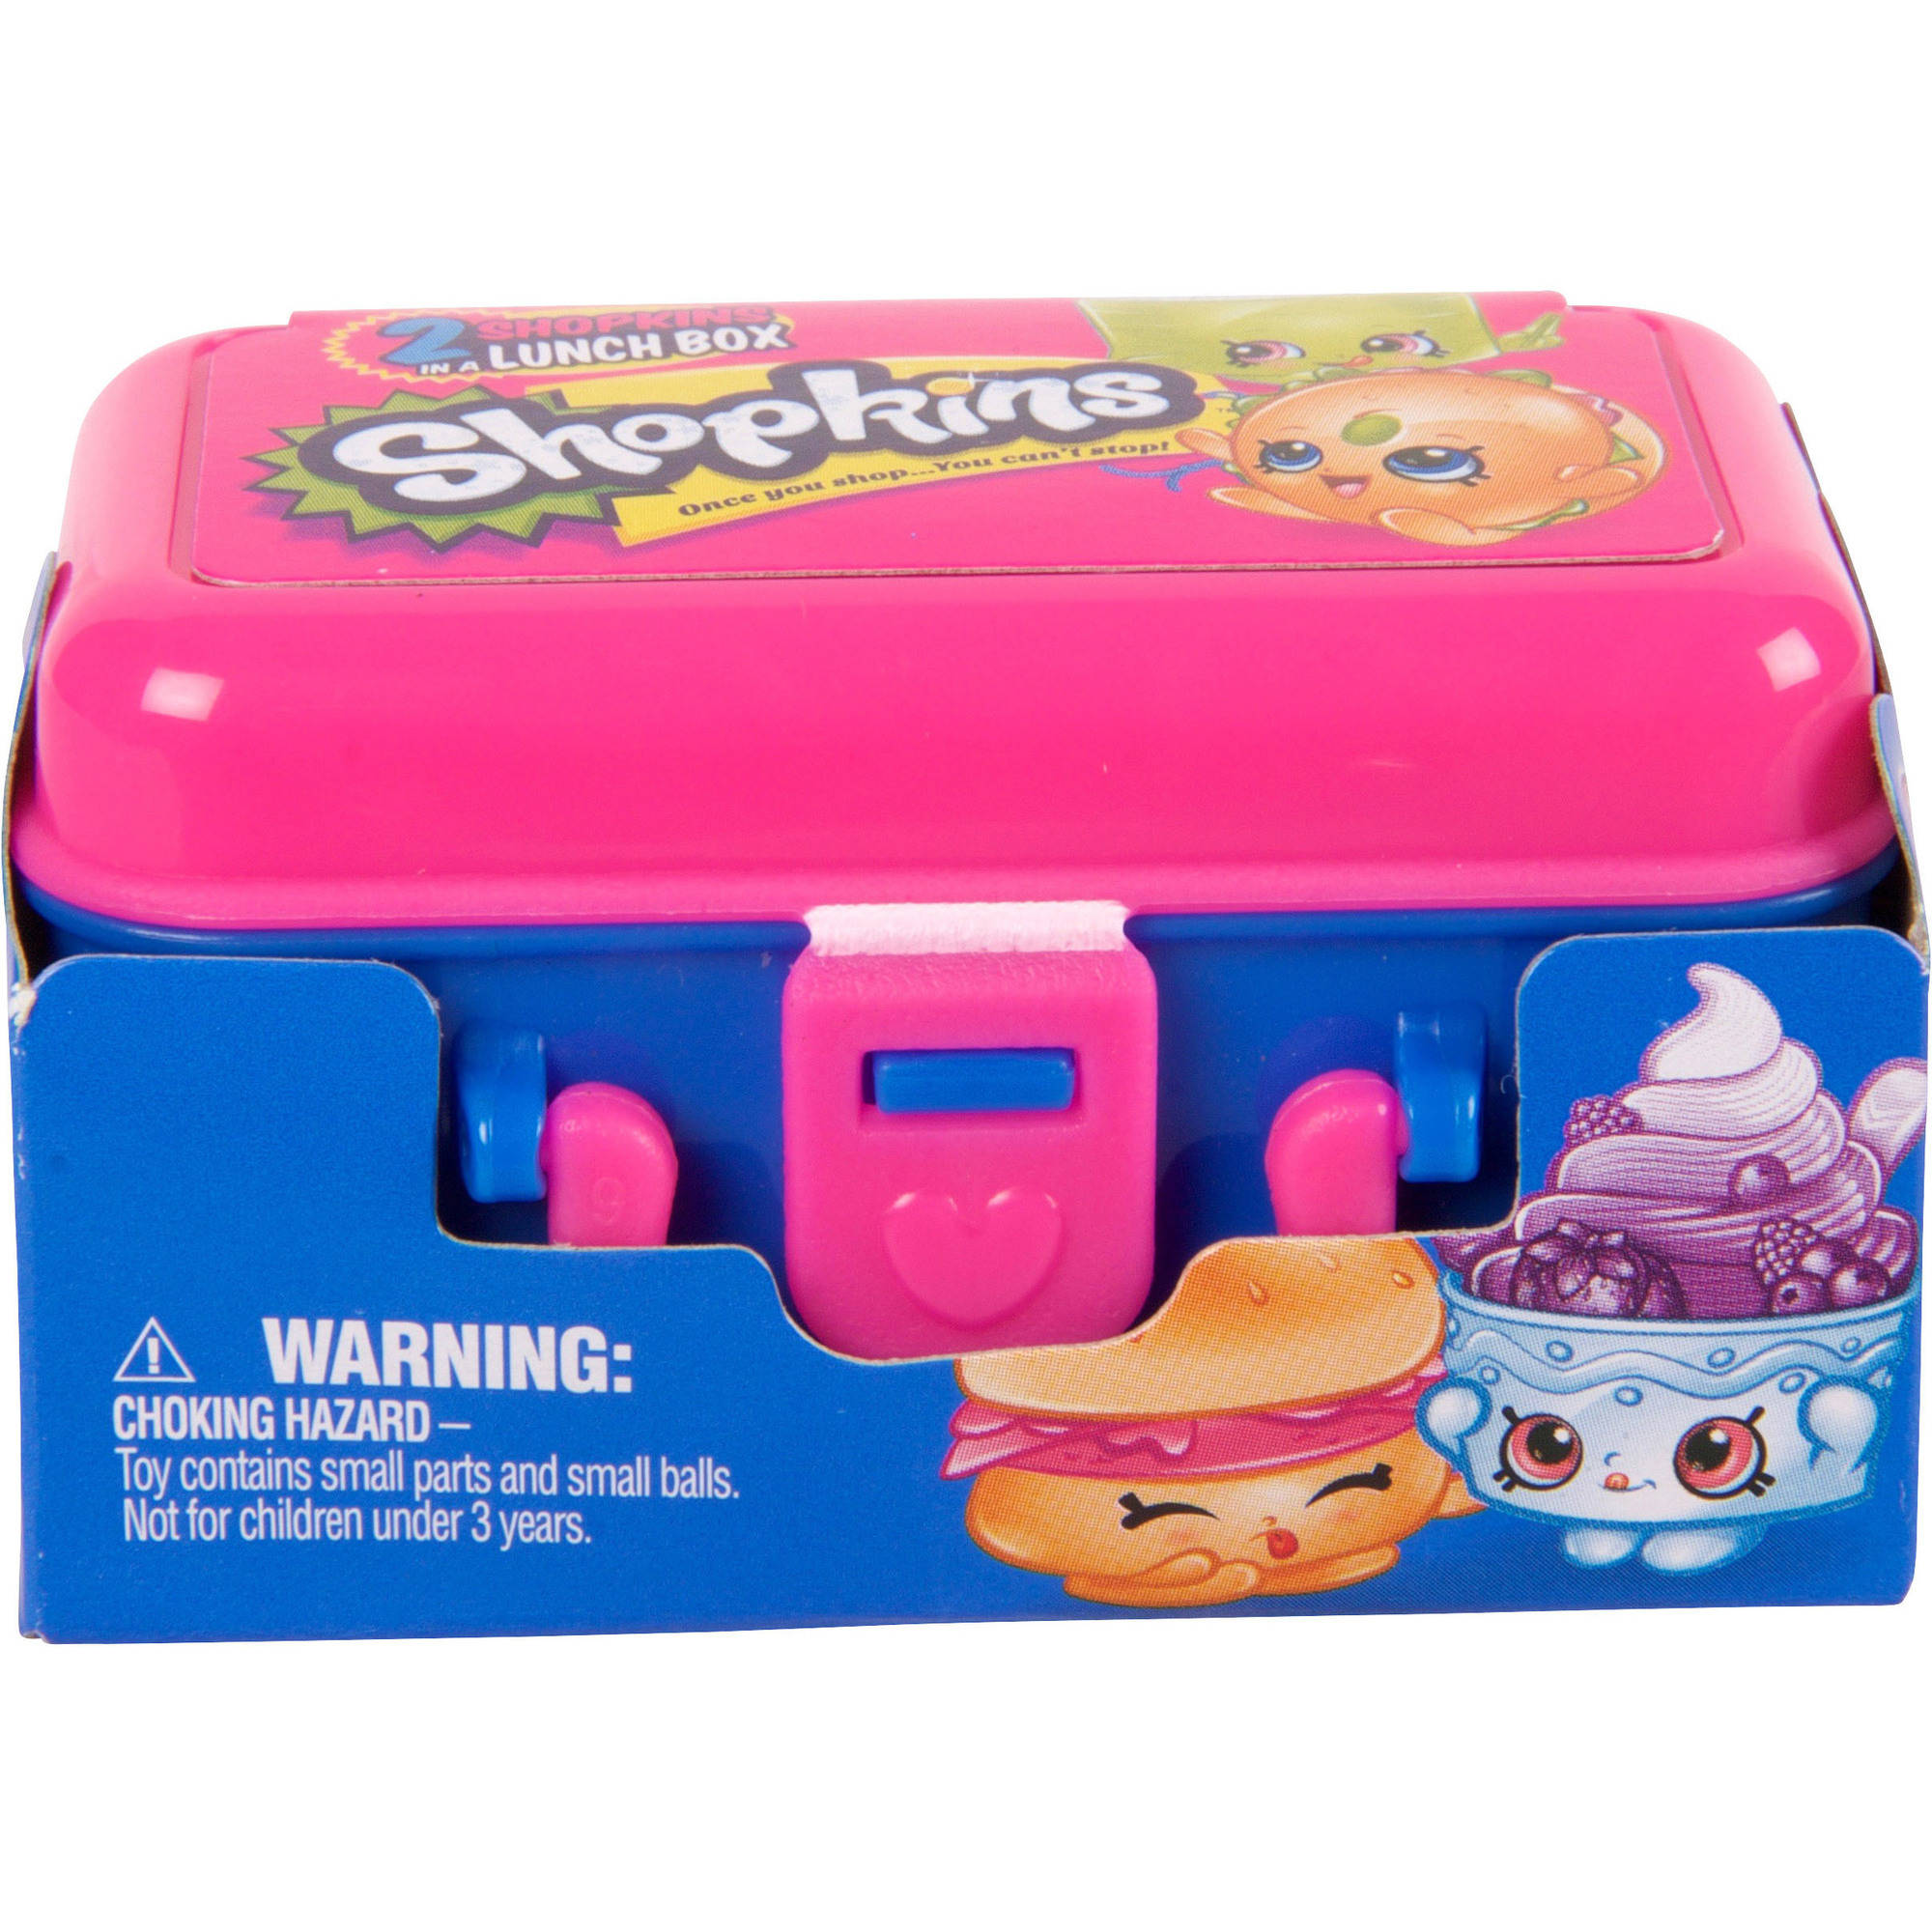 Shopkins Season 7 Walmart Exclusive Food 2-Pack of Shopkins + 1 Lunch Box Container - image 4 of 6